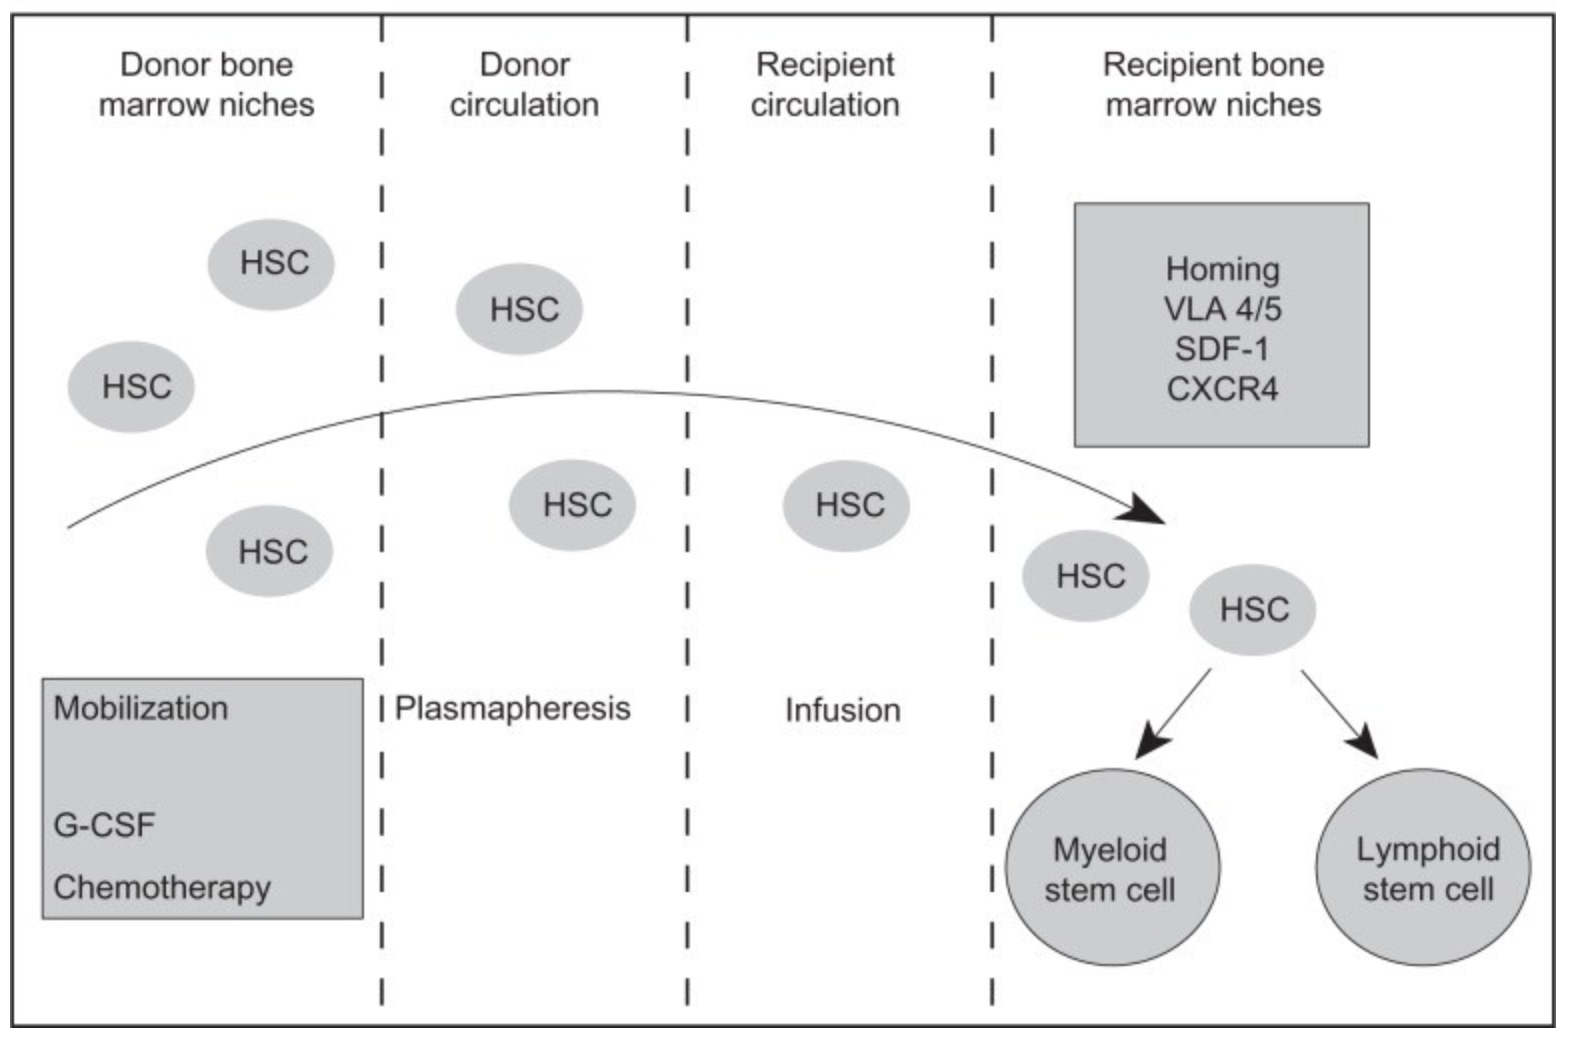 Figure 1 from Hatzimichael & Tuthill (2022) overviews the mobilization of hematopoietic stem cells (HSCs) from the bone marrow to the blood and the subsequent homing of HSCs to the bone marrow in the recipient after infusion, including key molecules involved in the process; vLA-4/5, very late activation antigen; SDF-1, stromal cell-derived factor-1; G-CSF, granulocyte colony-stimulating factor.